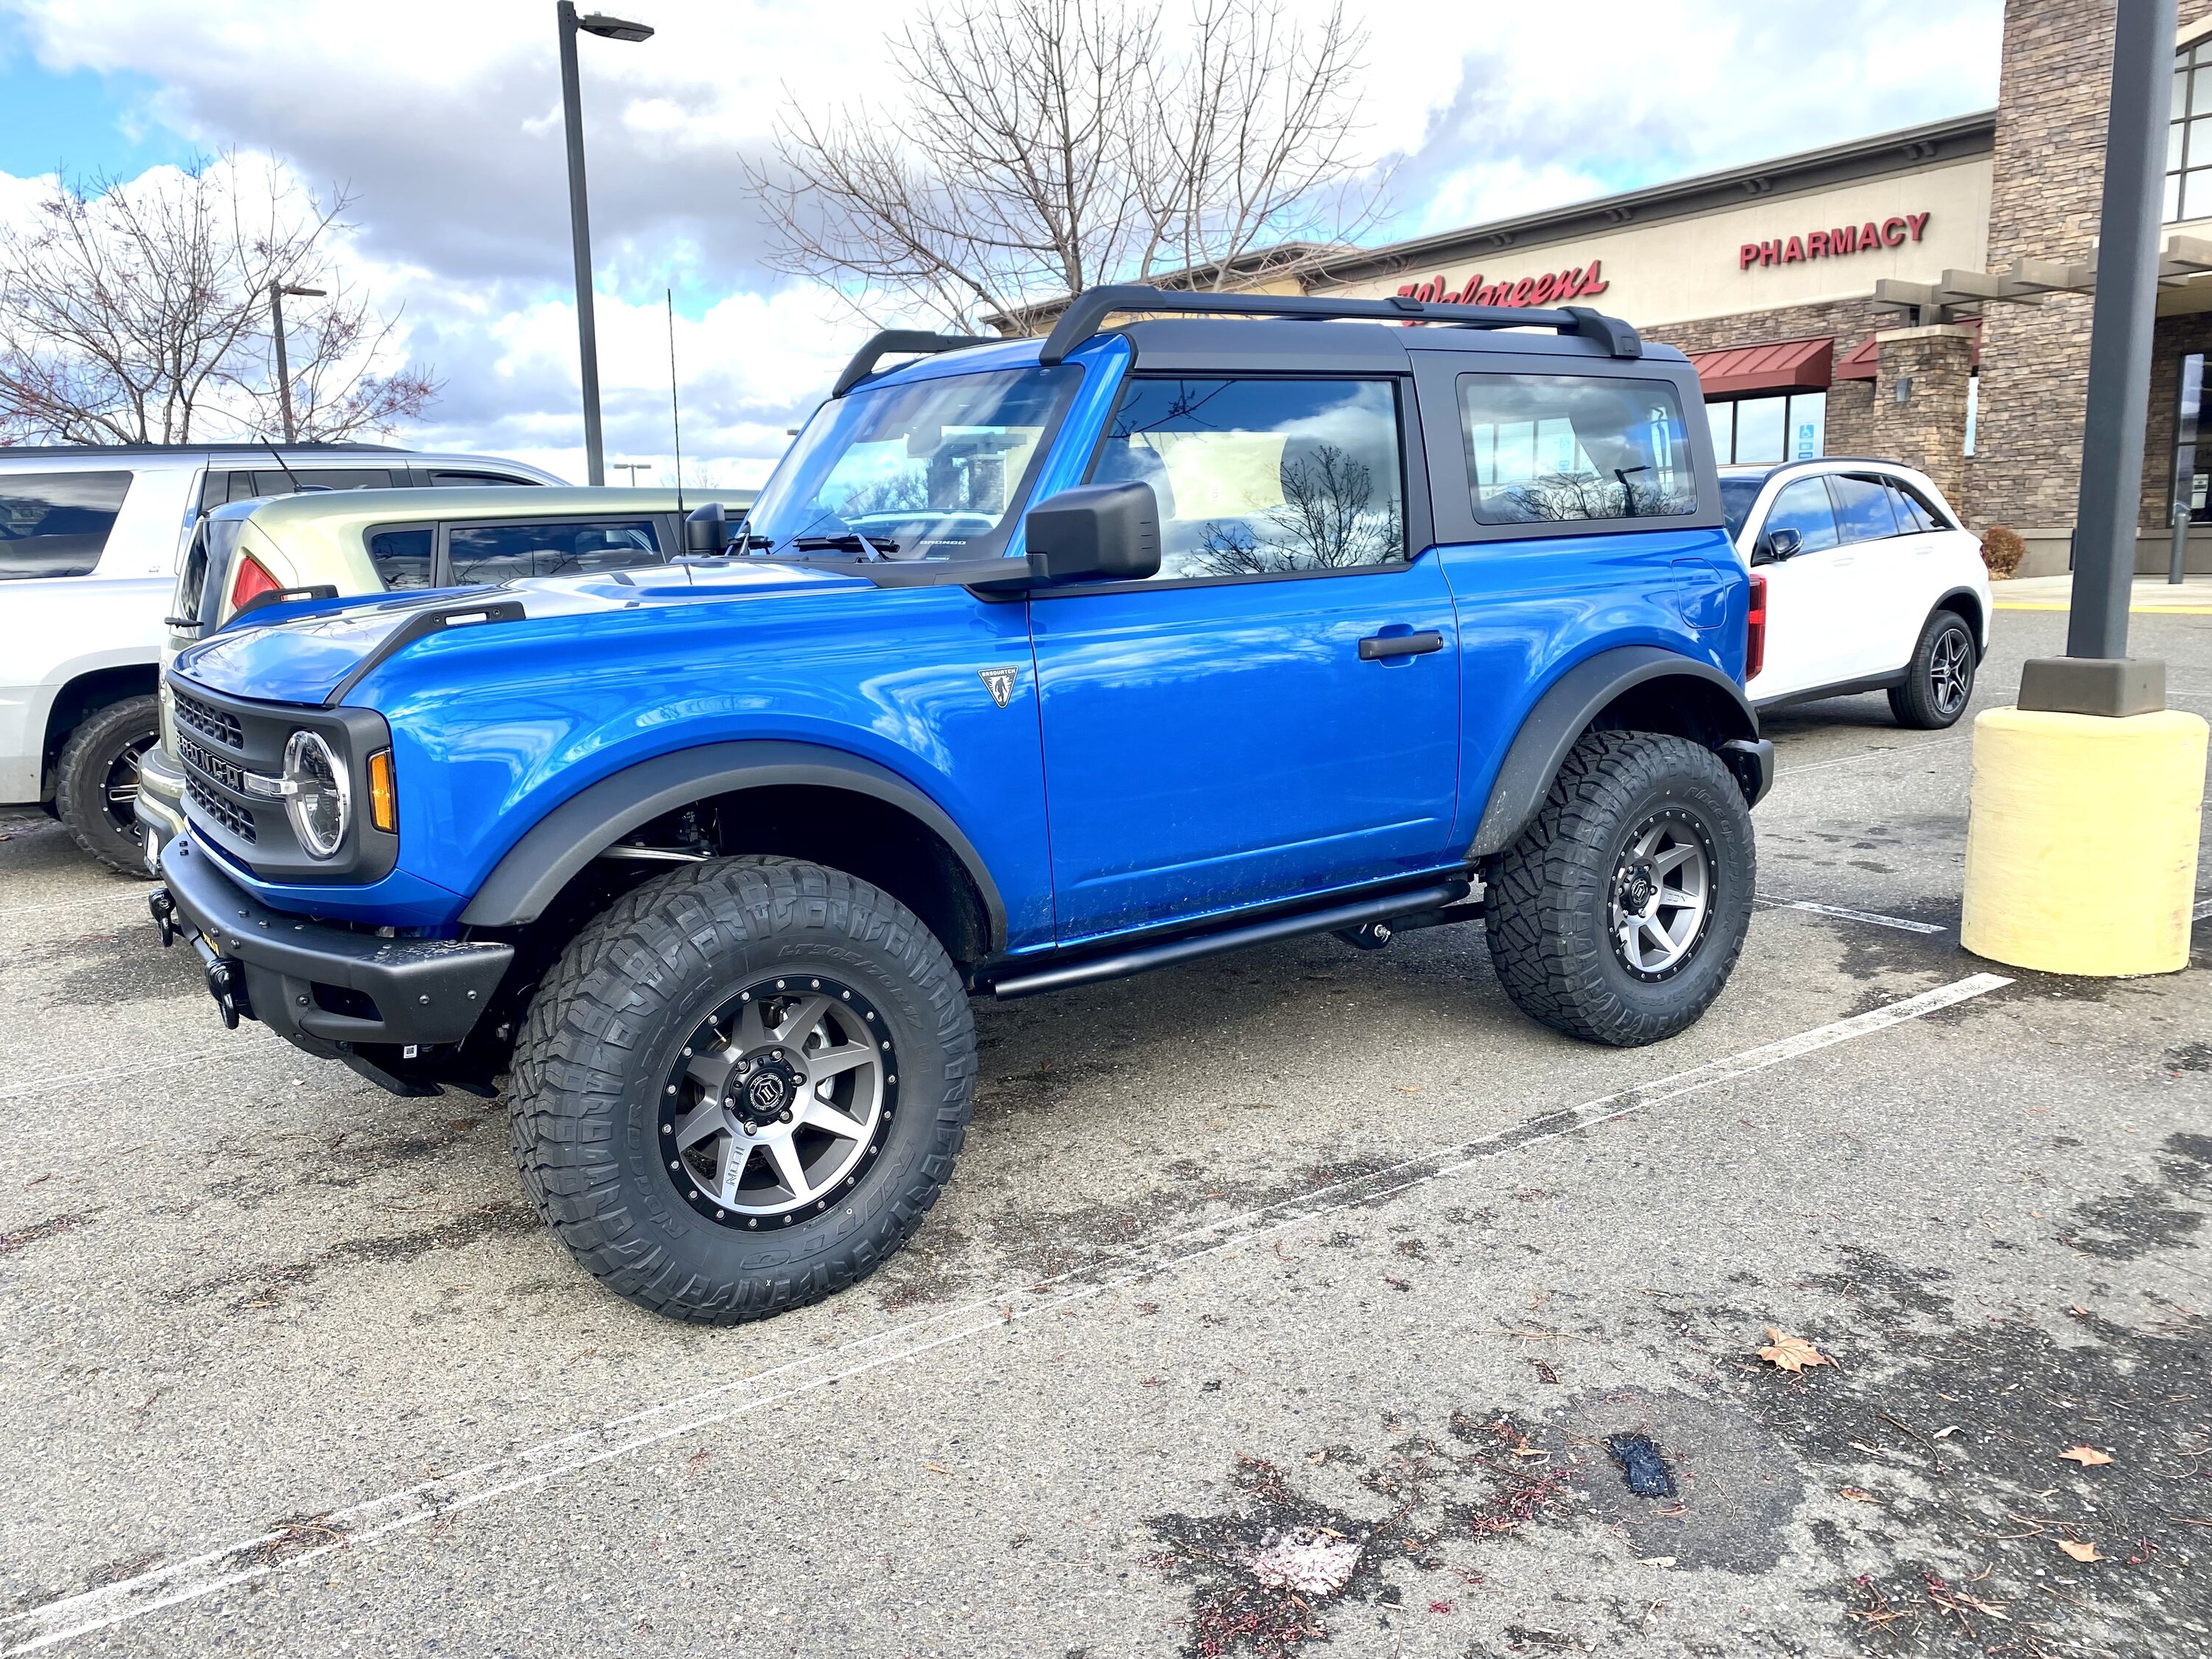 Ford Bronco Drop a Picture of Your Bronco for a Rating EF13CCD9-C45F-4081-B25C-F0B468680D7B